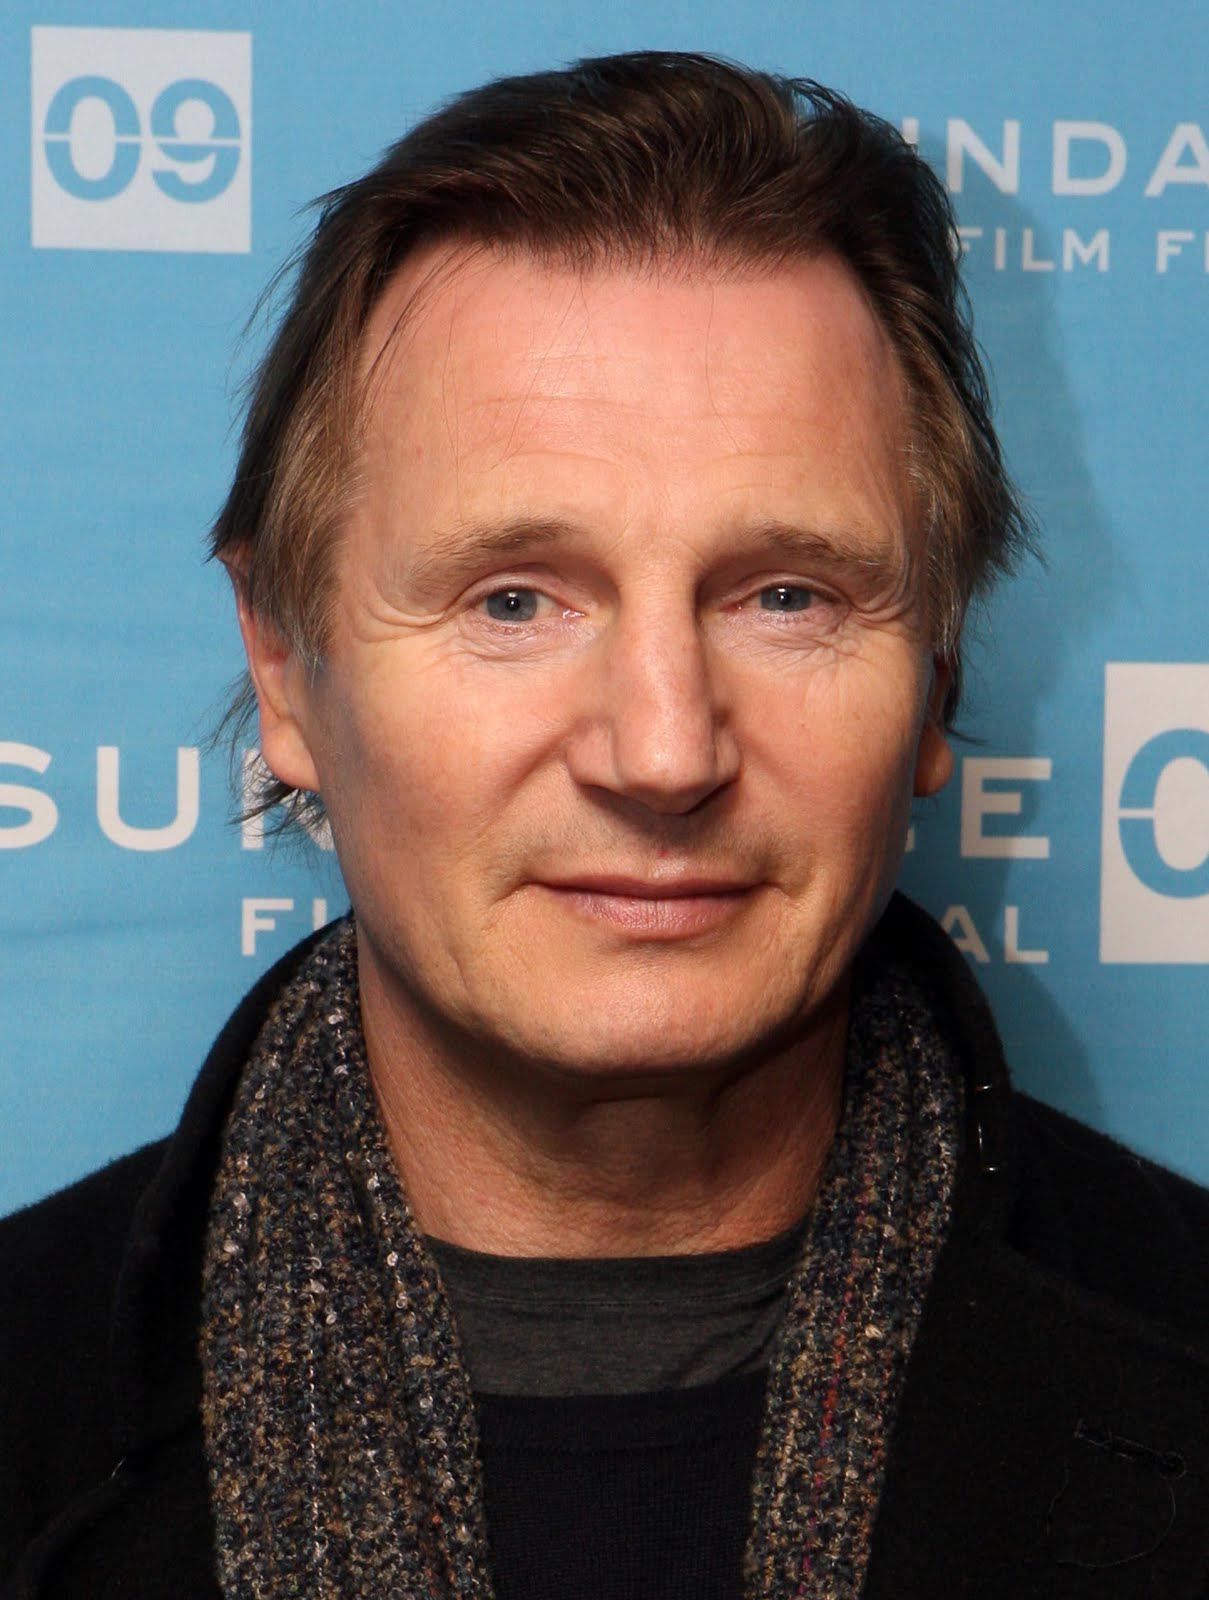 Liam Neeson - Images Actress